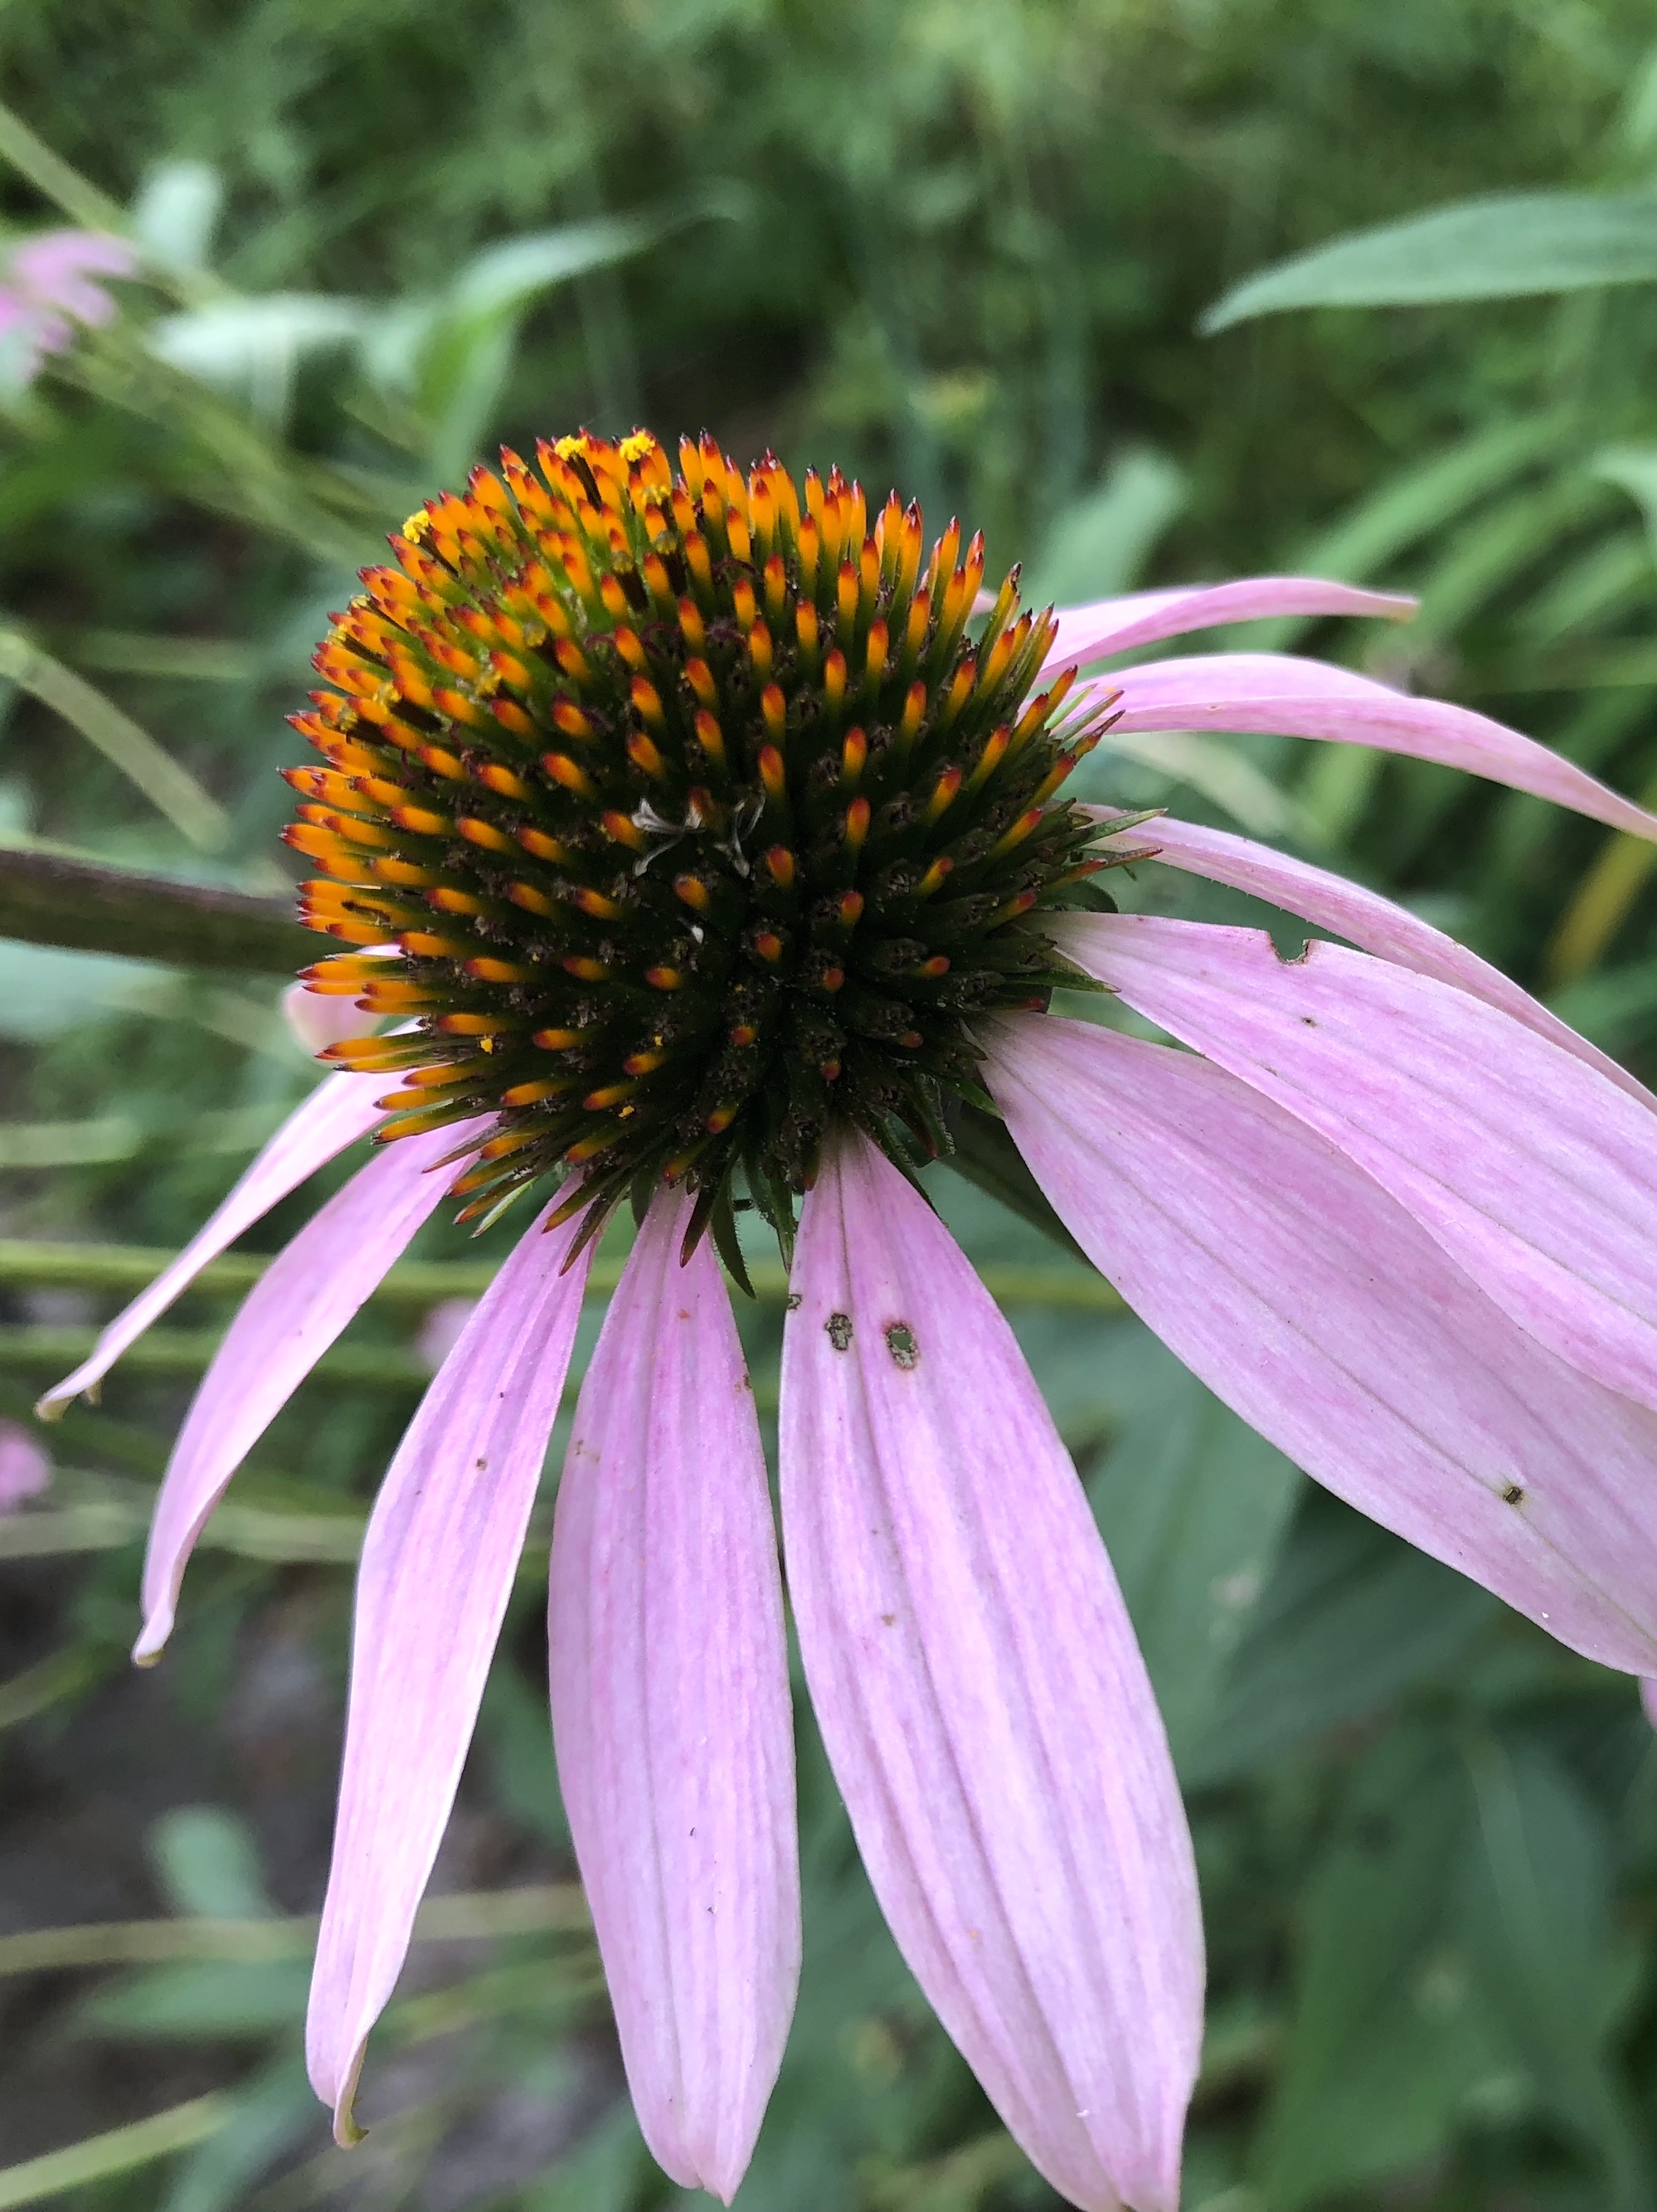 Purple coneflower on bikepath at Glenway crossing in Madison, Wisconsin on August 15, 2018.